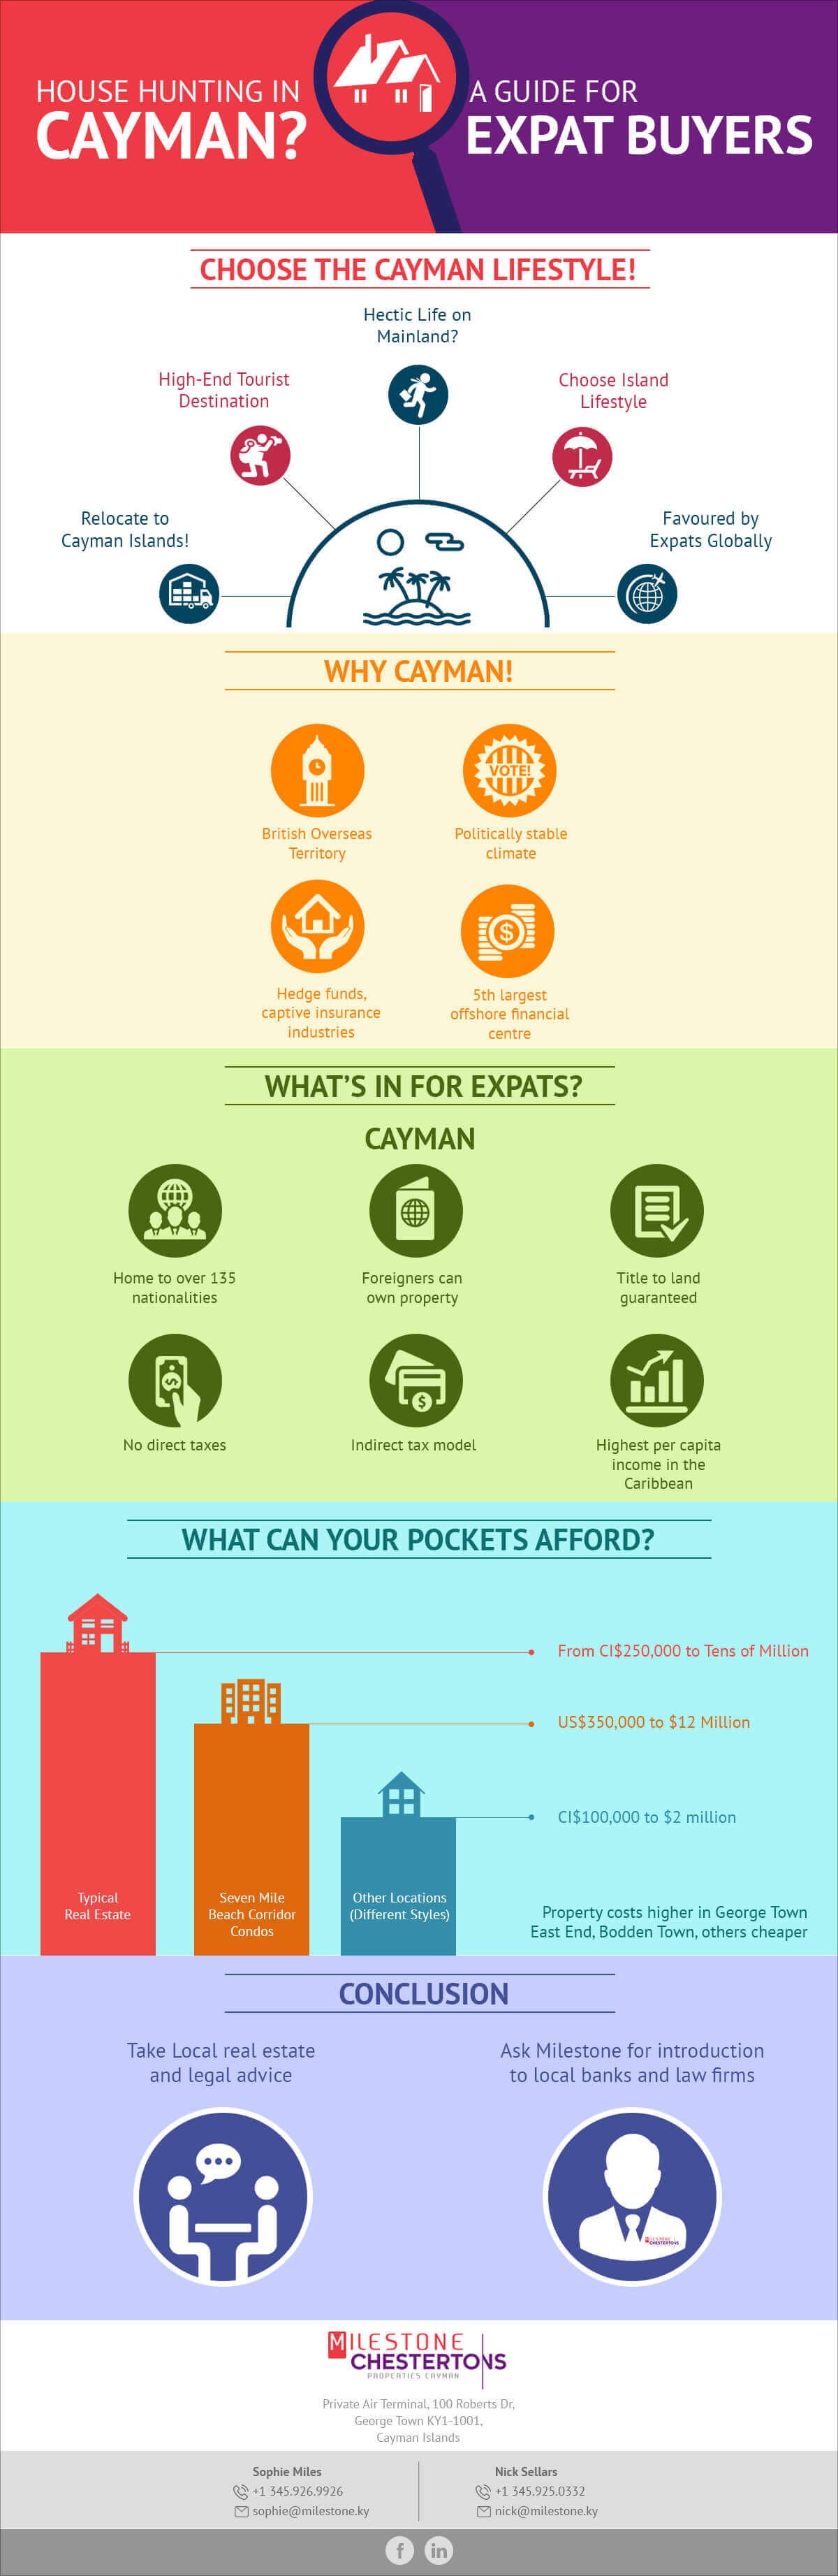 Infographic: House hunting in Cayman? A Guide for Expat Buyers